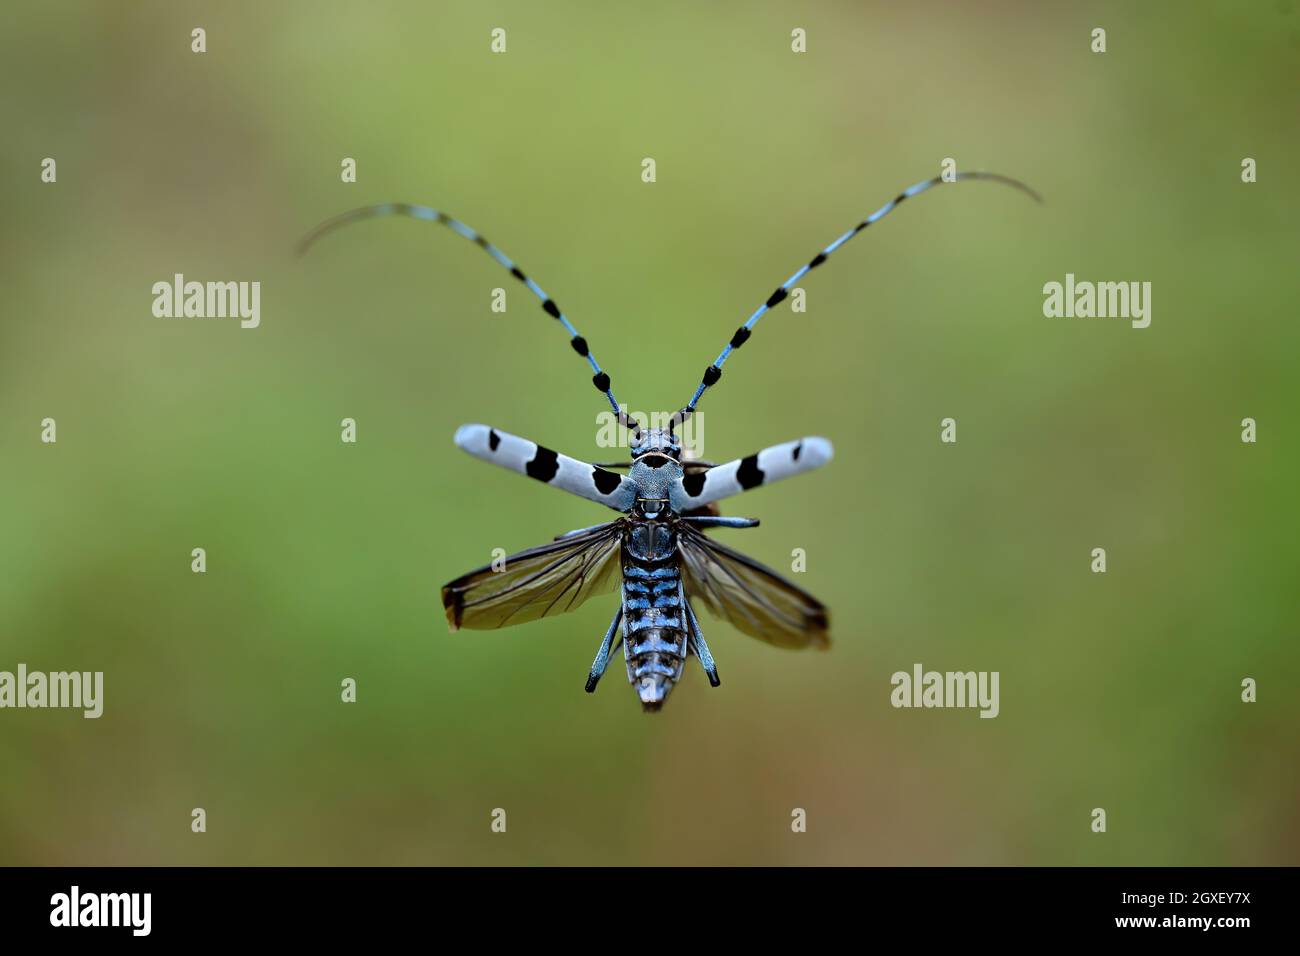 Nominaal aankomst periscoop Alpine longhorn beetle flying in summertime nature. Rare blue insect with  black spots in the air in green environment. Bug wit long feelers in flight  Stock Photo - Alamy